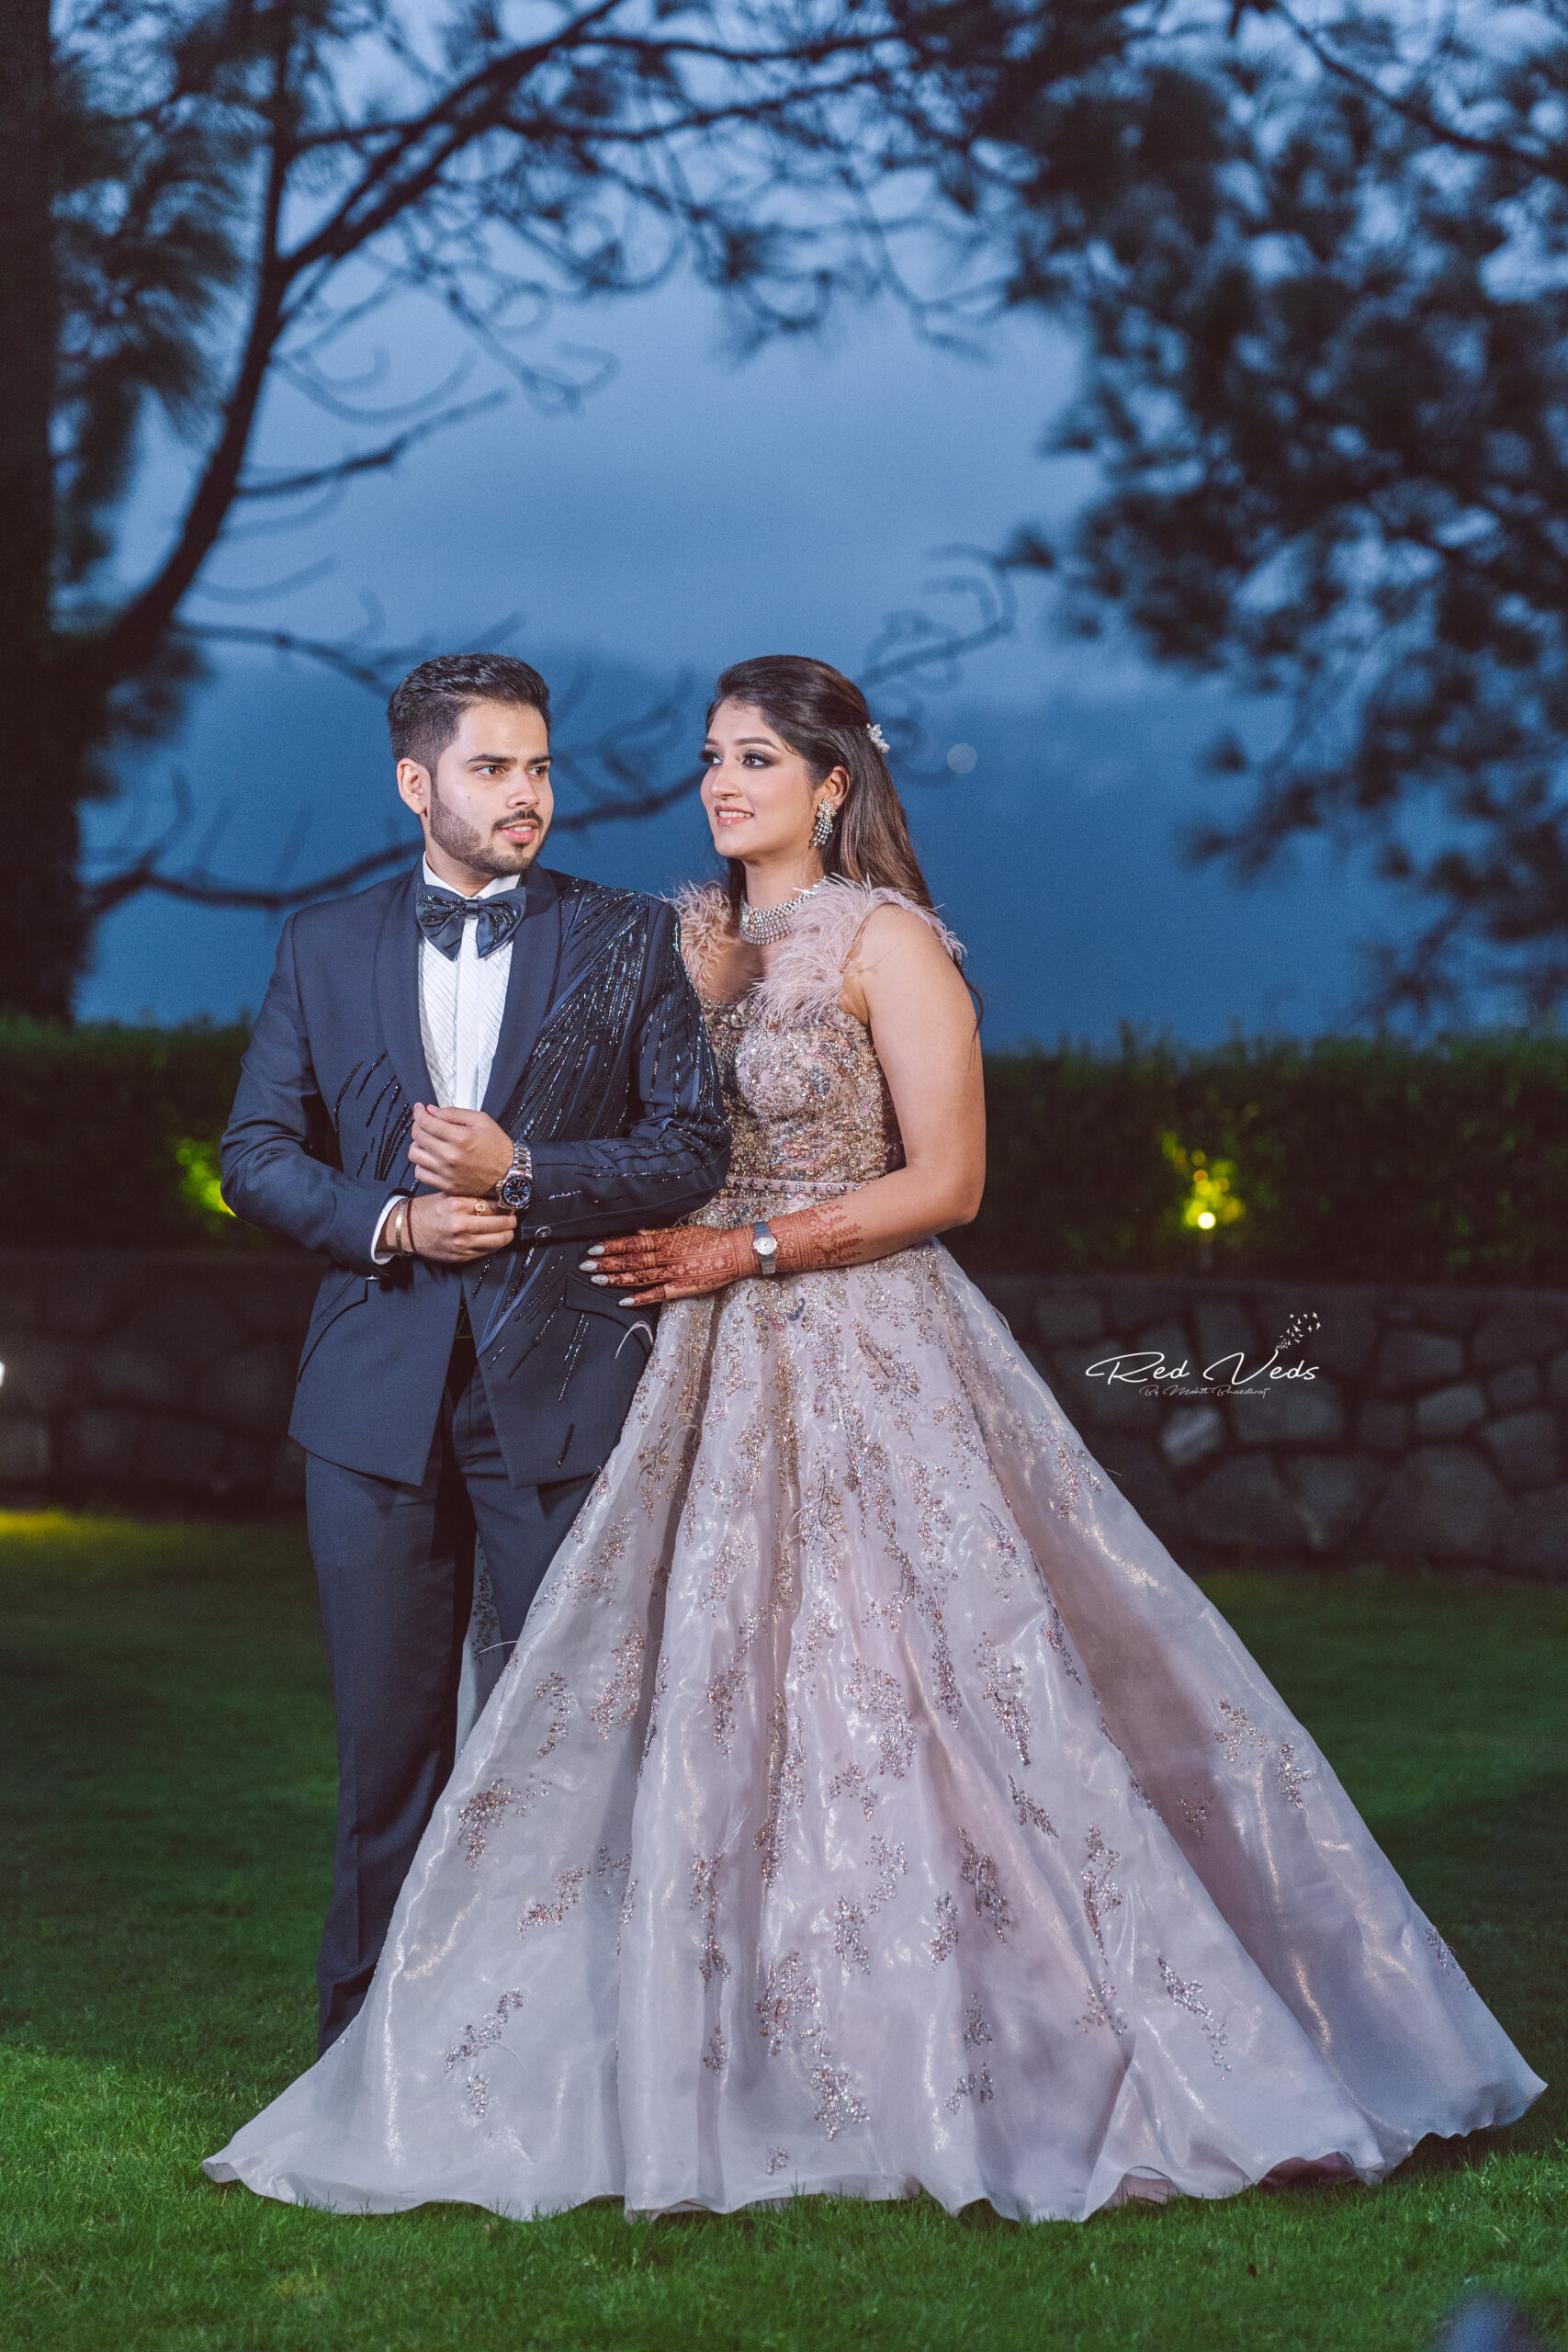 14+ Beautiful Pre Wedding Dress Ideas For Couples